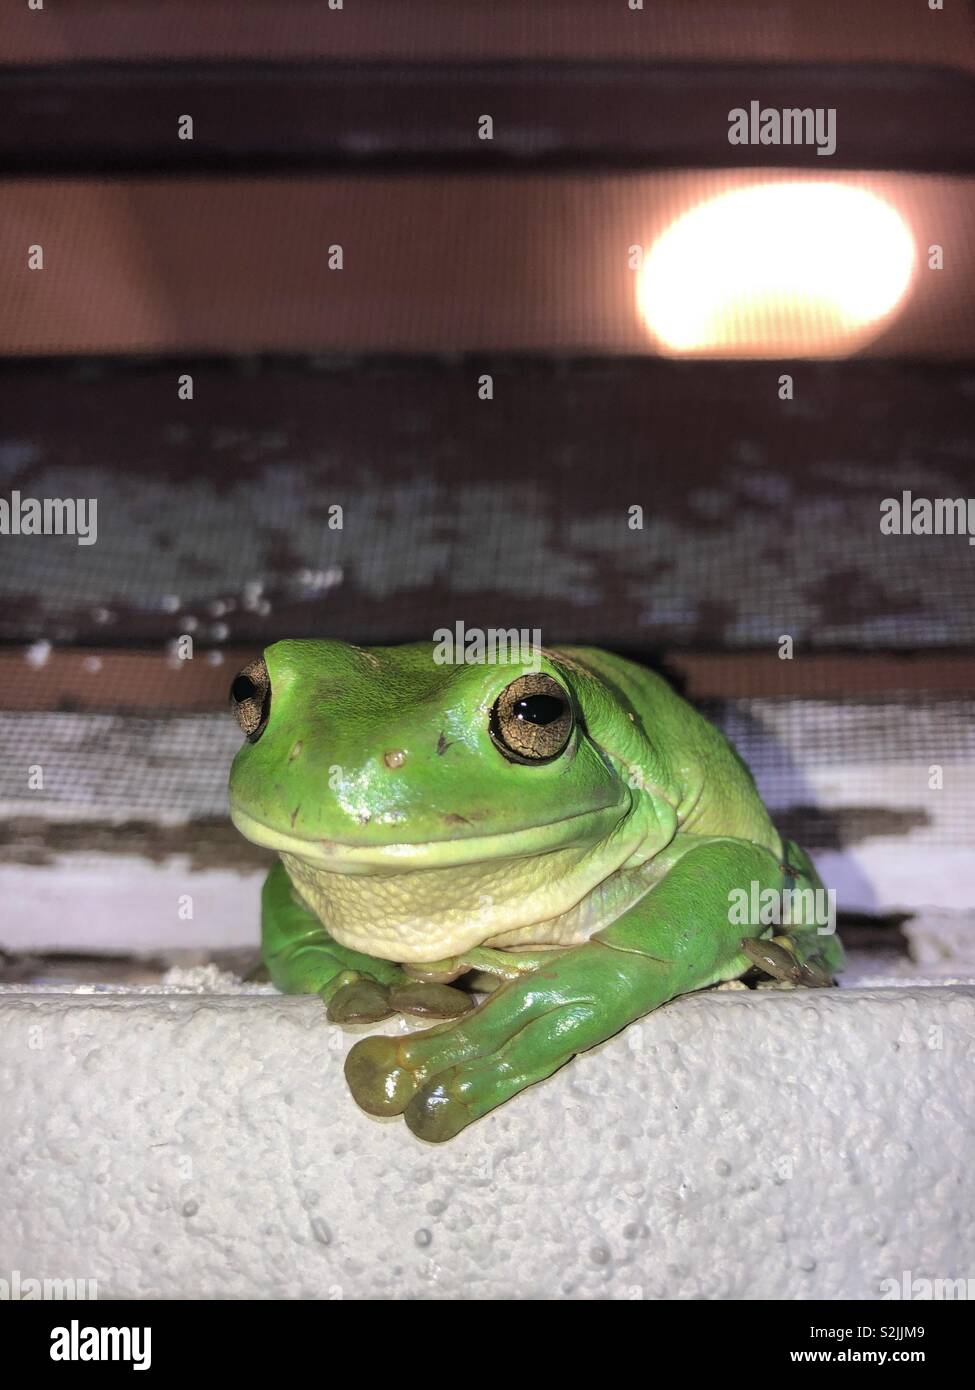 Green tree frog sitting on a windowsill and looking at the camera. Stock Photo